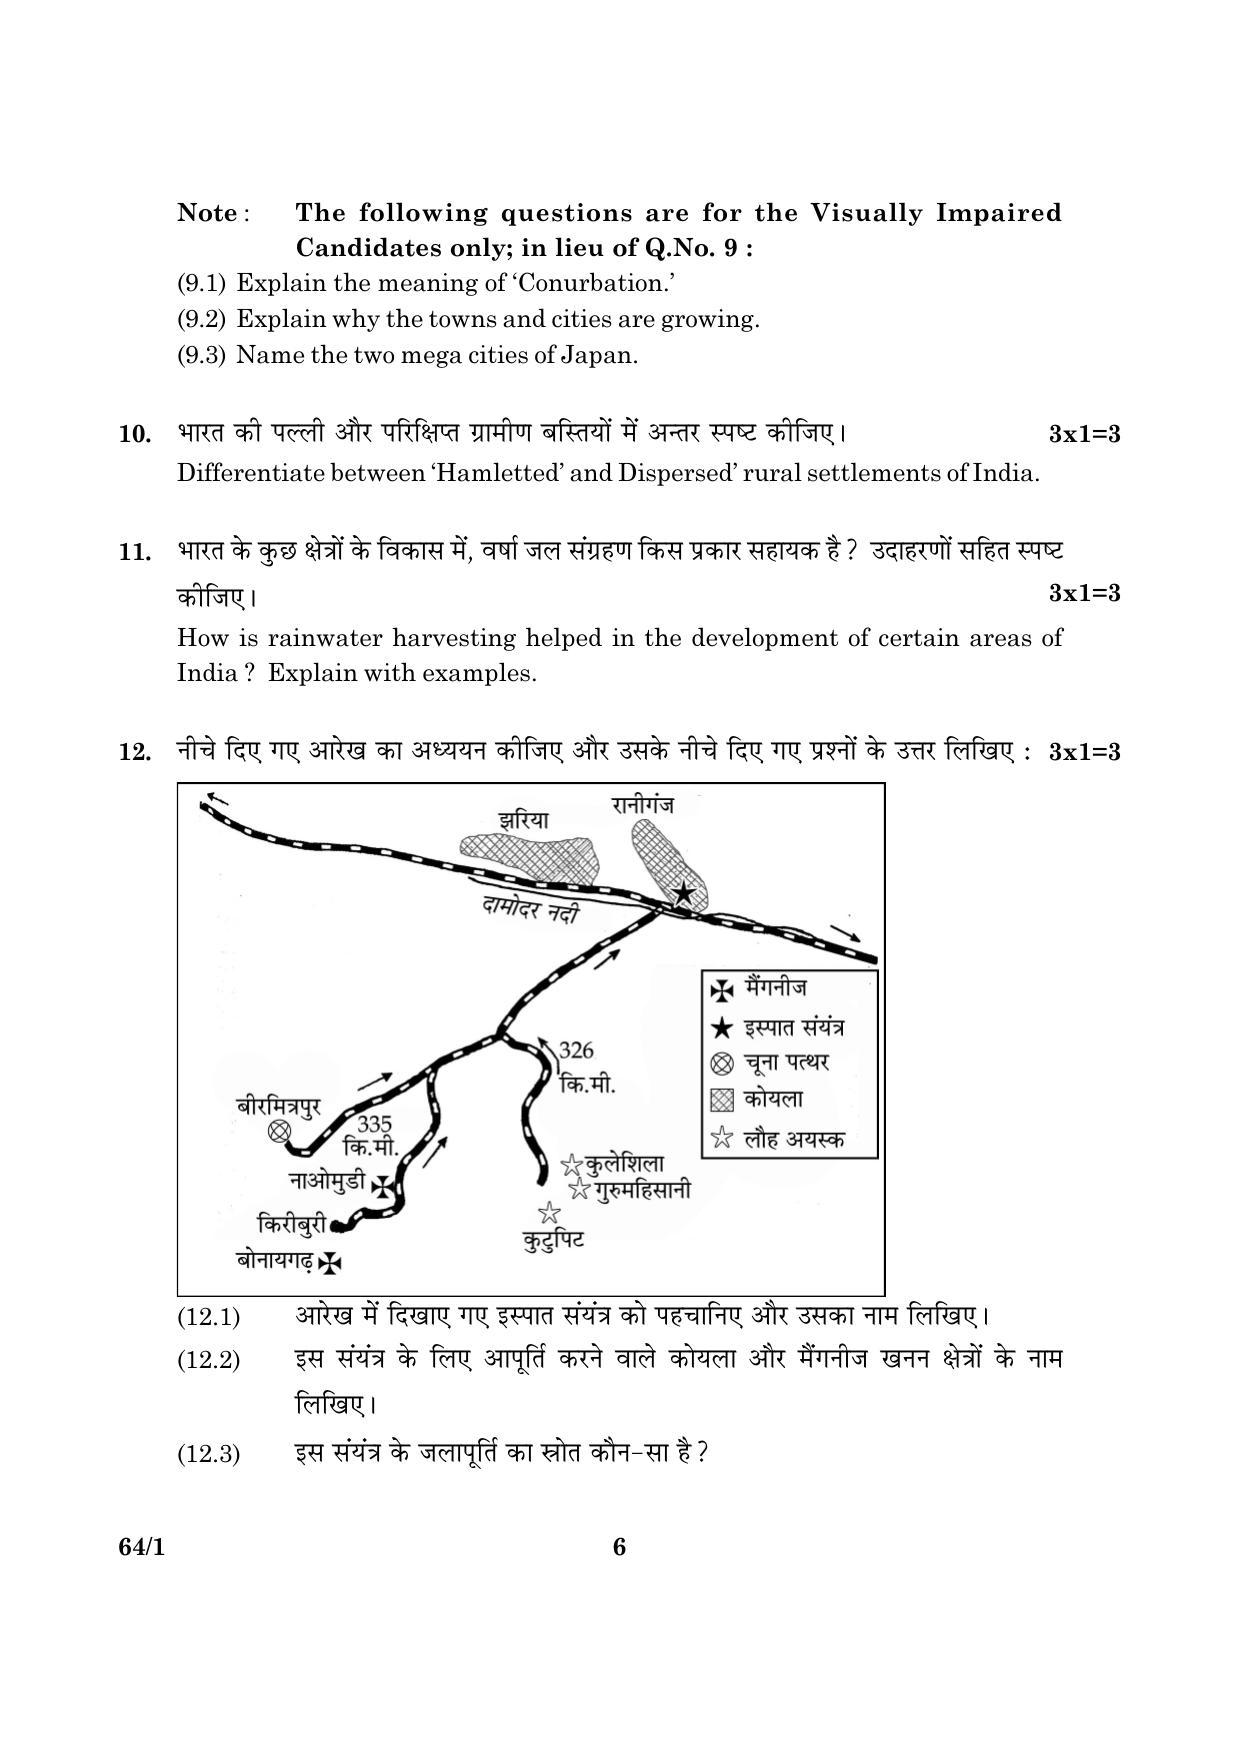 CBSE Class 12 064 Set 1 Geography 2016 Question Paper - Page 6